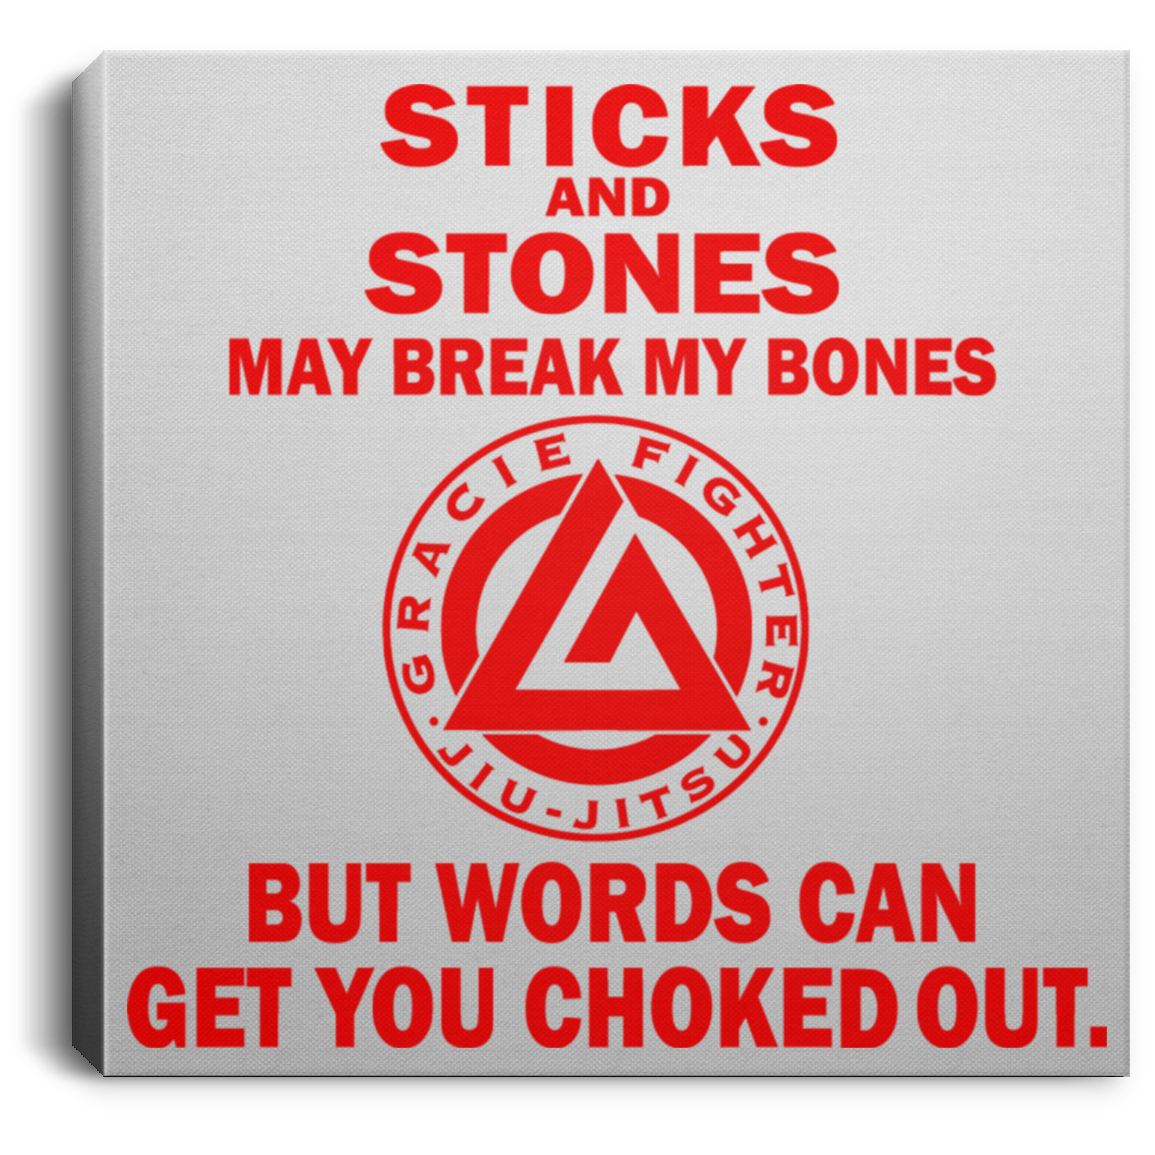 Artichoke Fight Gear Custom Design #16. Sticks And Stones May Break My Bones But Words Can Get You Choked Out. Gracie Fighter. BJJ. Square Canvas .75in Frame